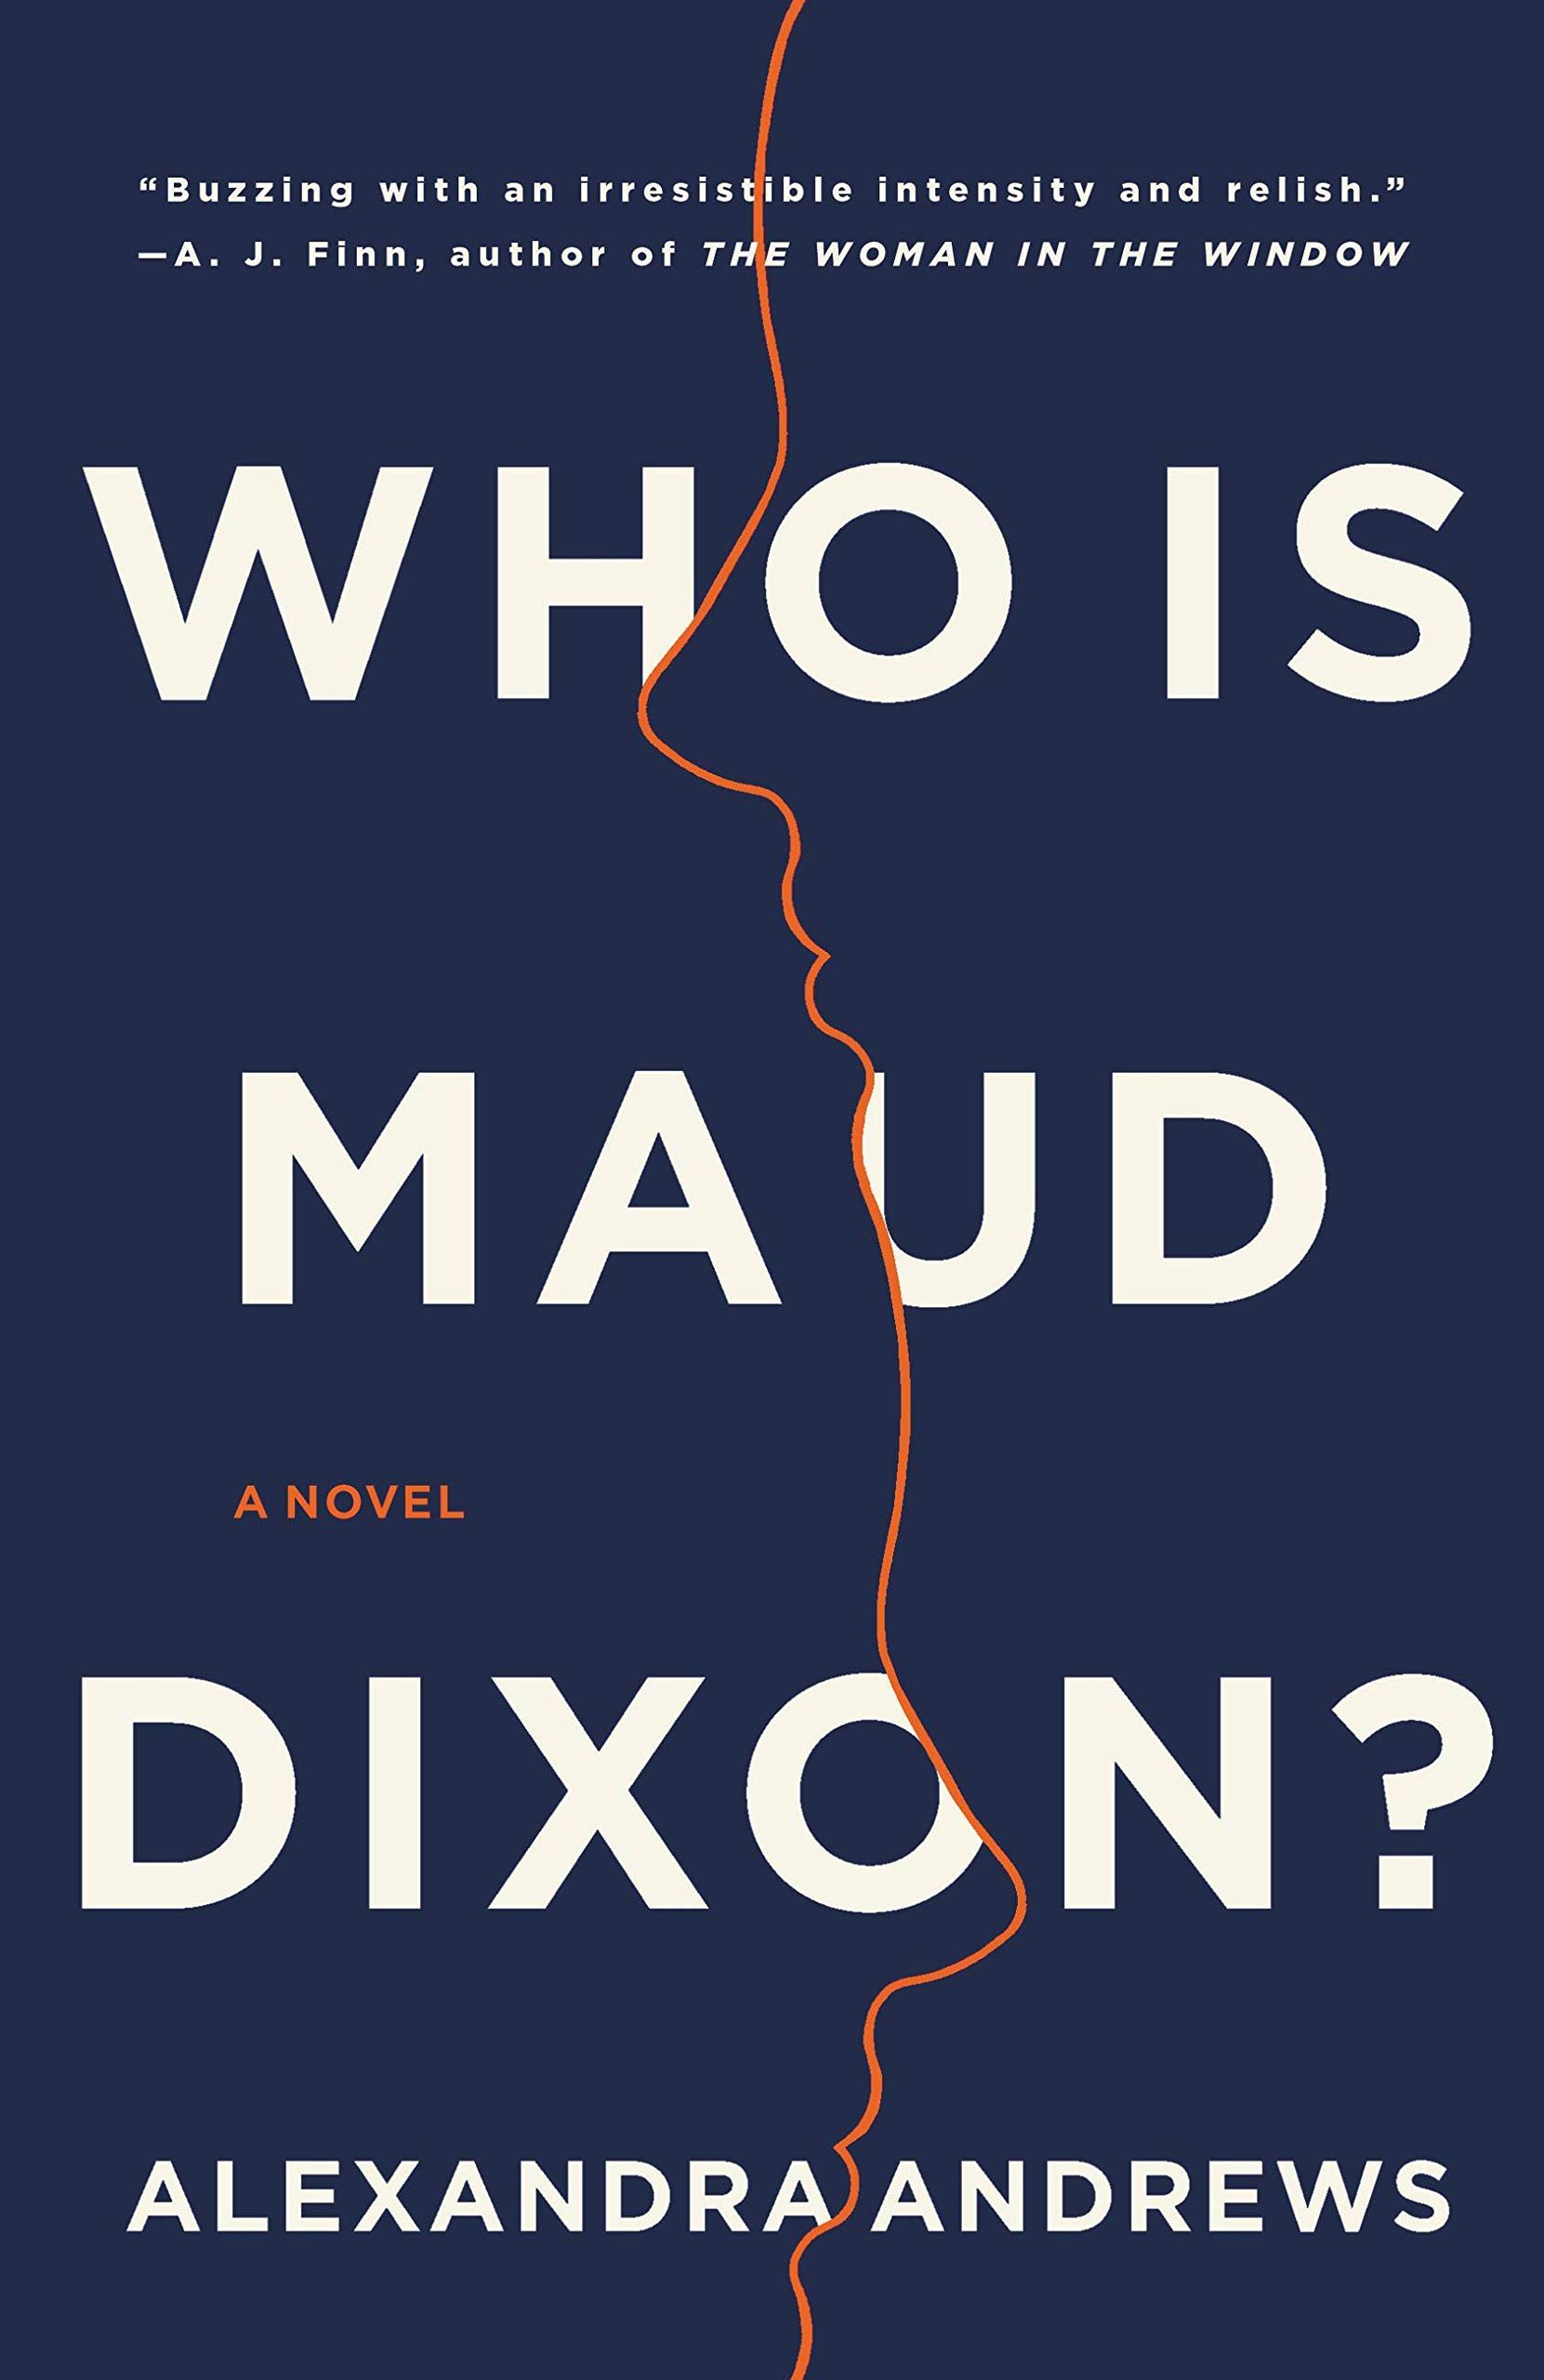 Image for "Who is Maud Dixon?"